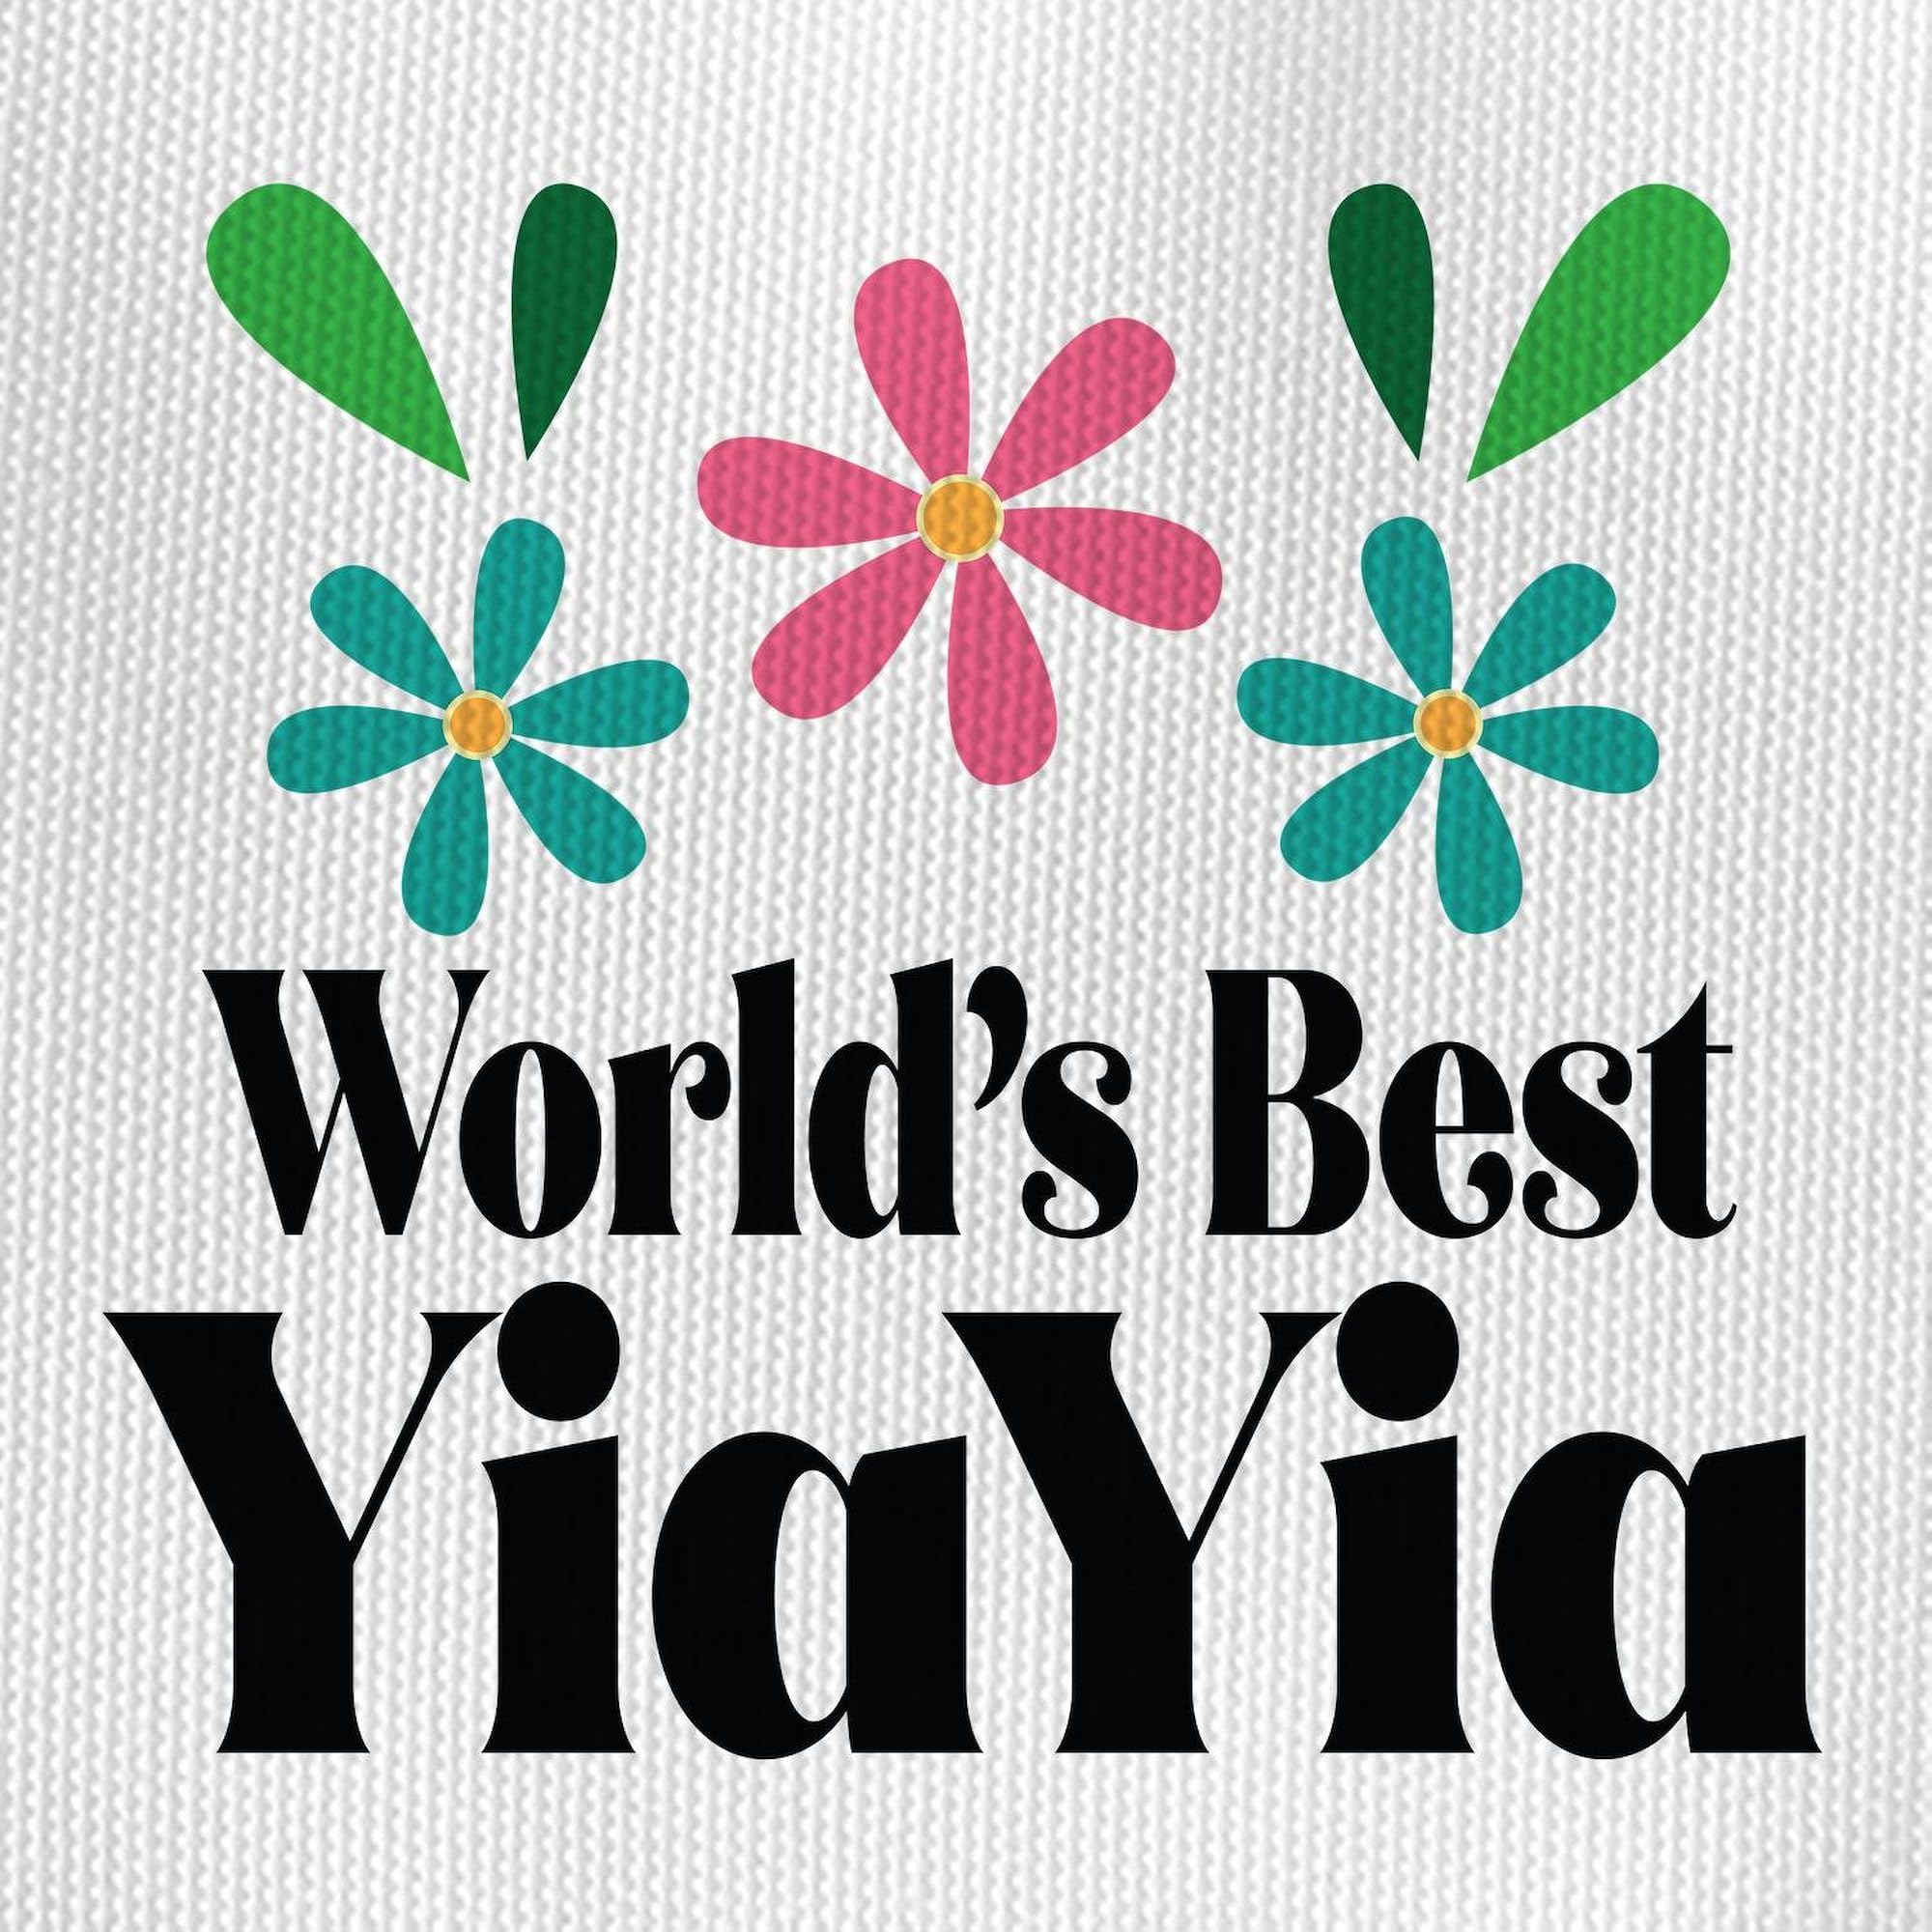 CafePress Worlds Best Yia Yia Pot Holder with Unique Design 9"x9"